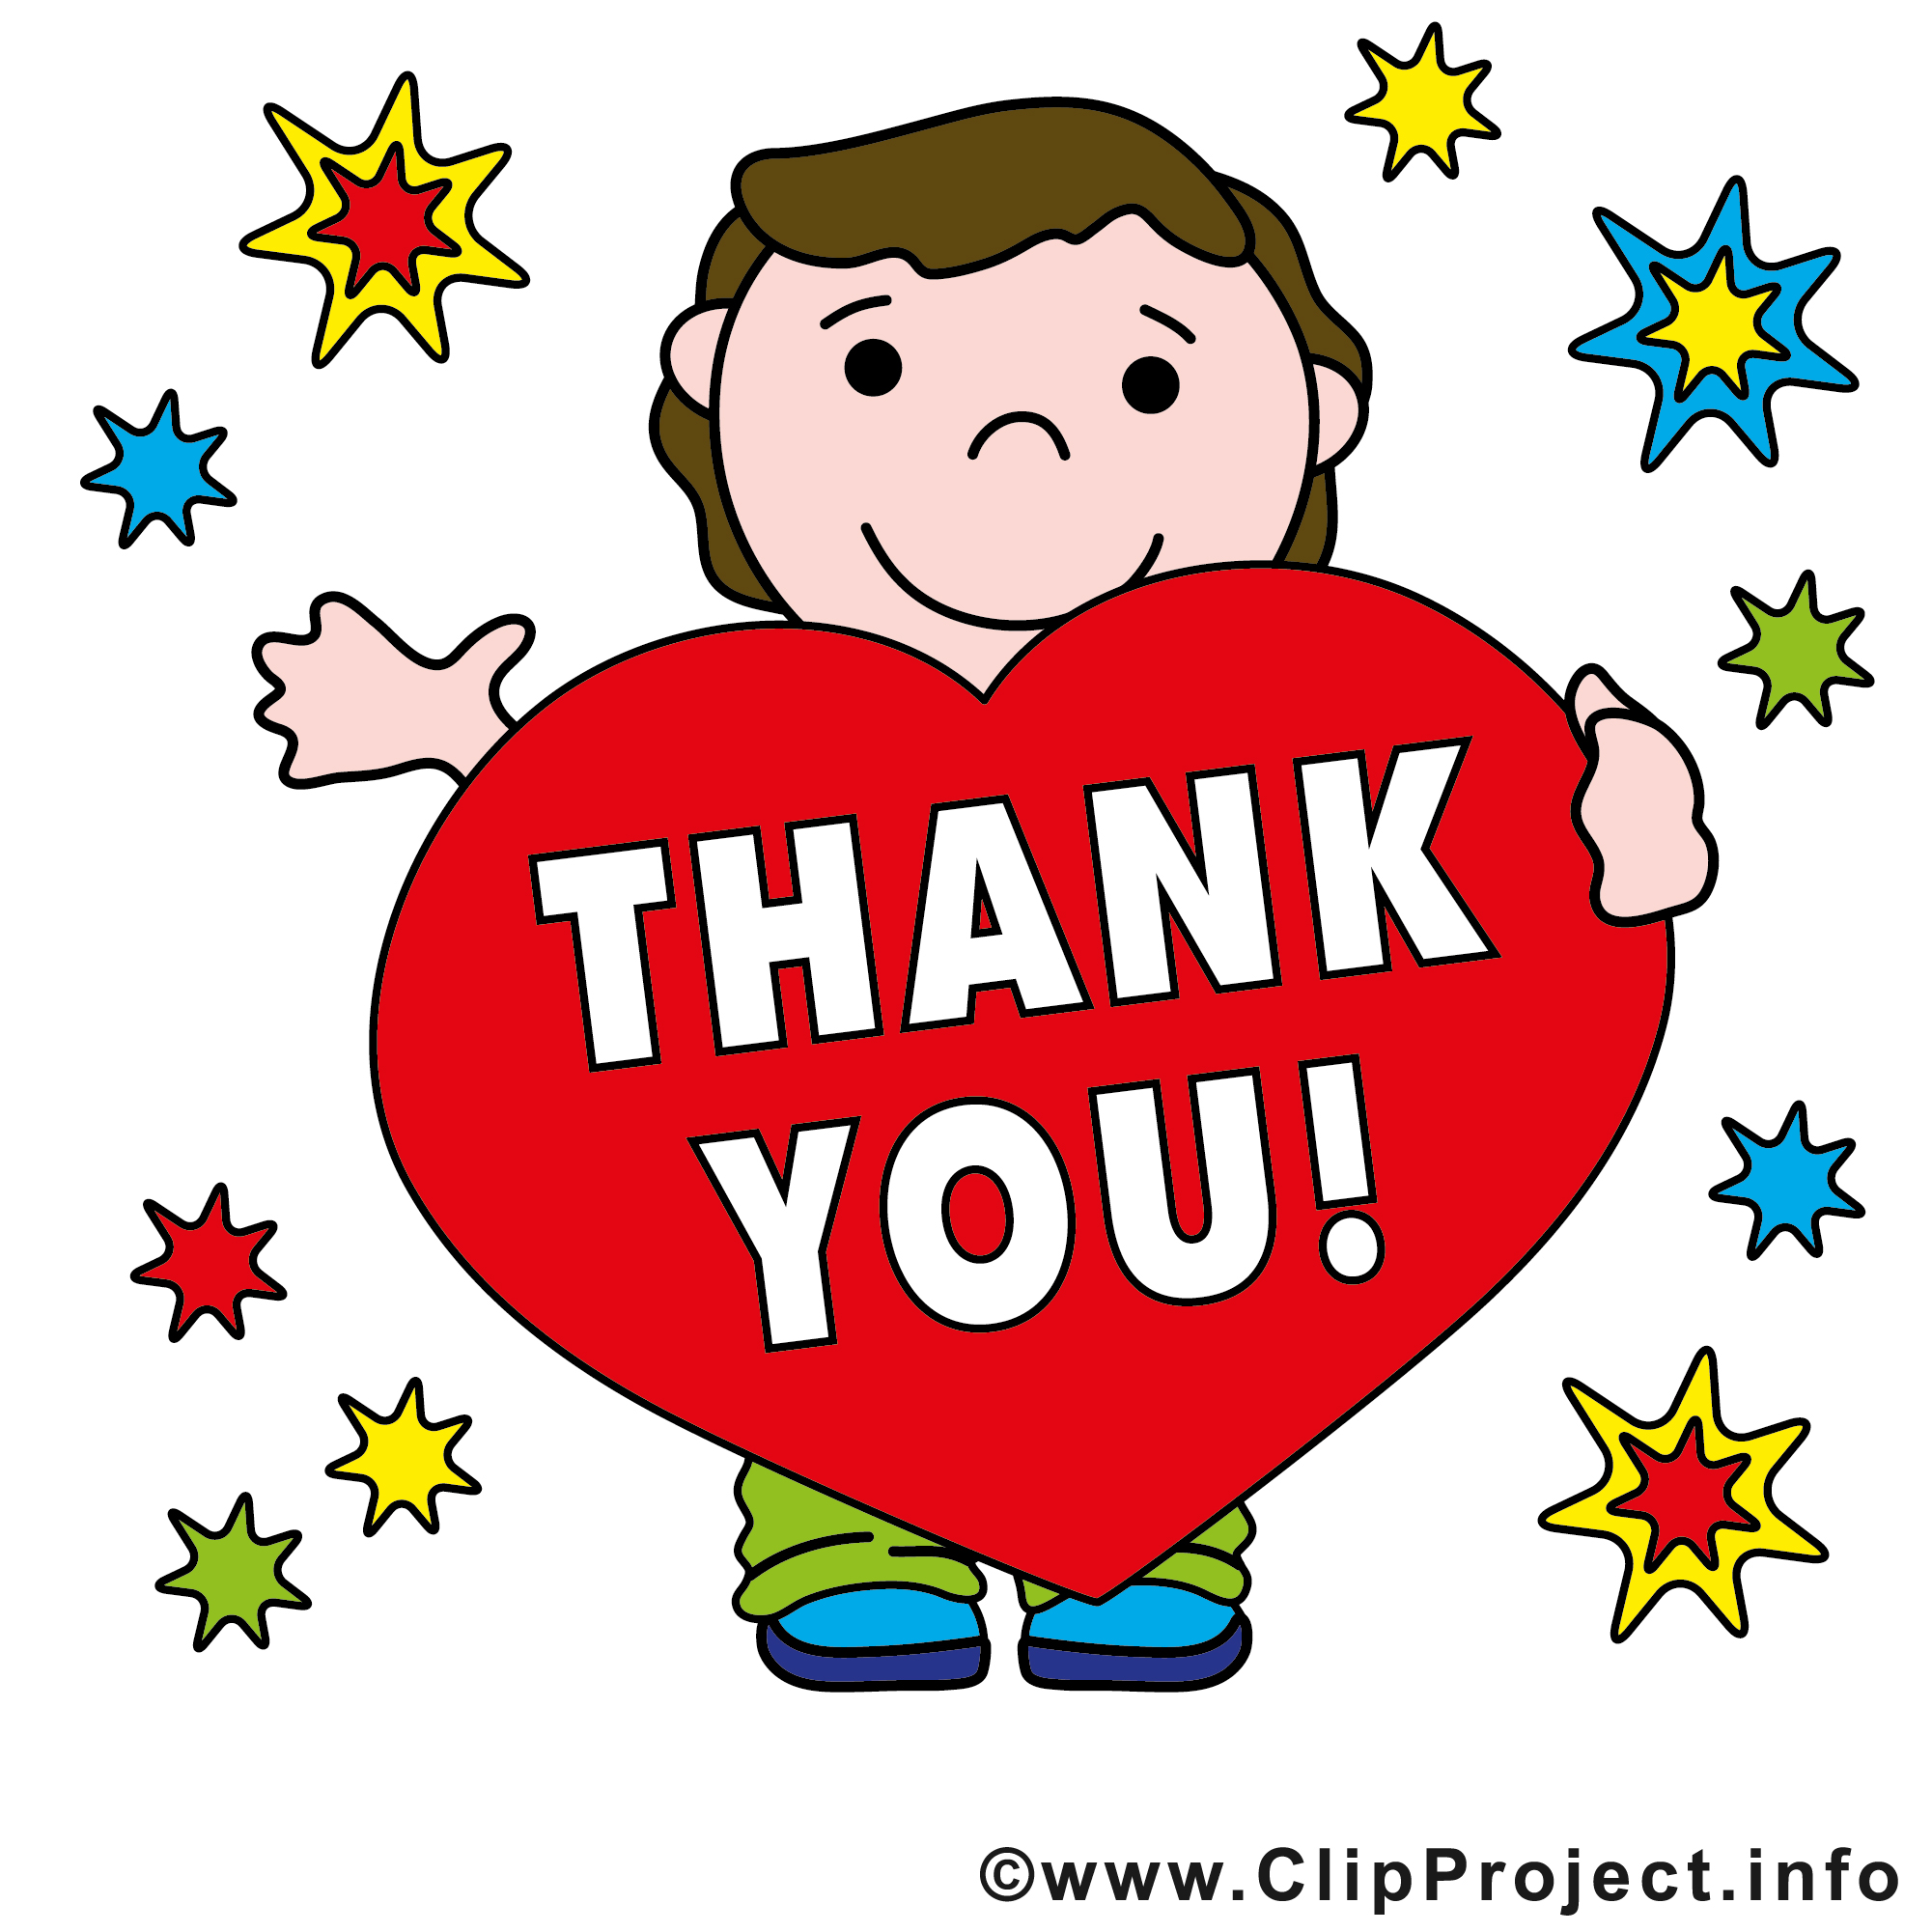 Thank you clip art free clipart images 2 2